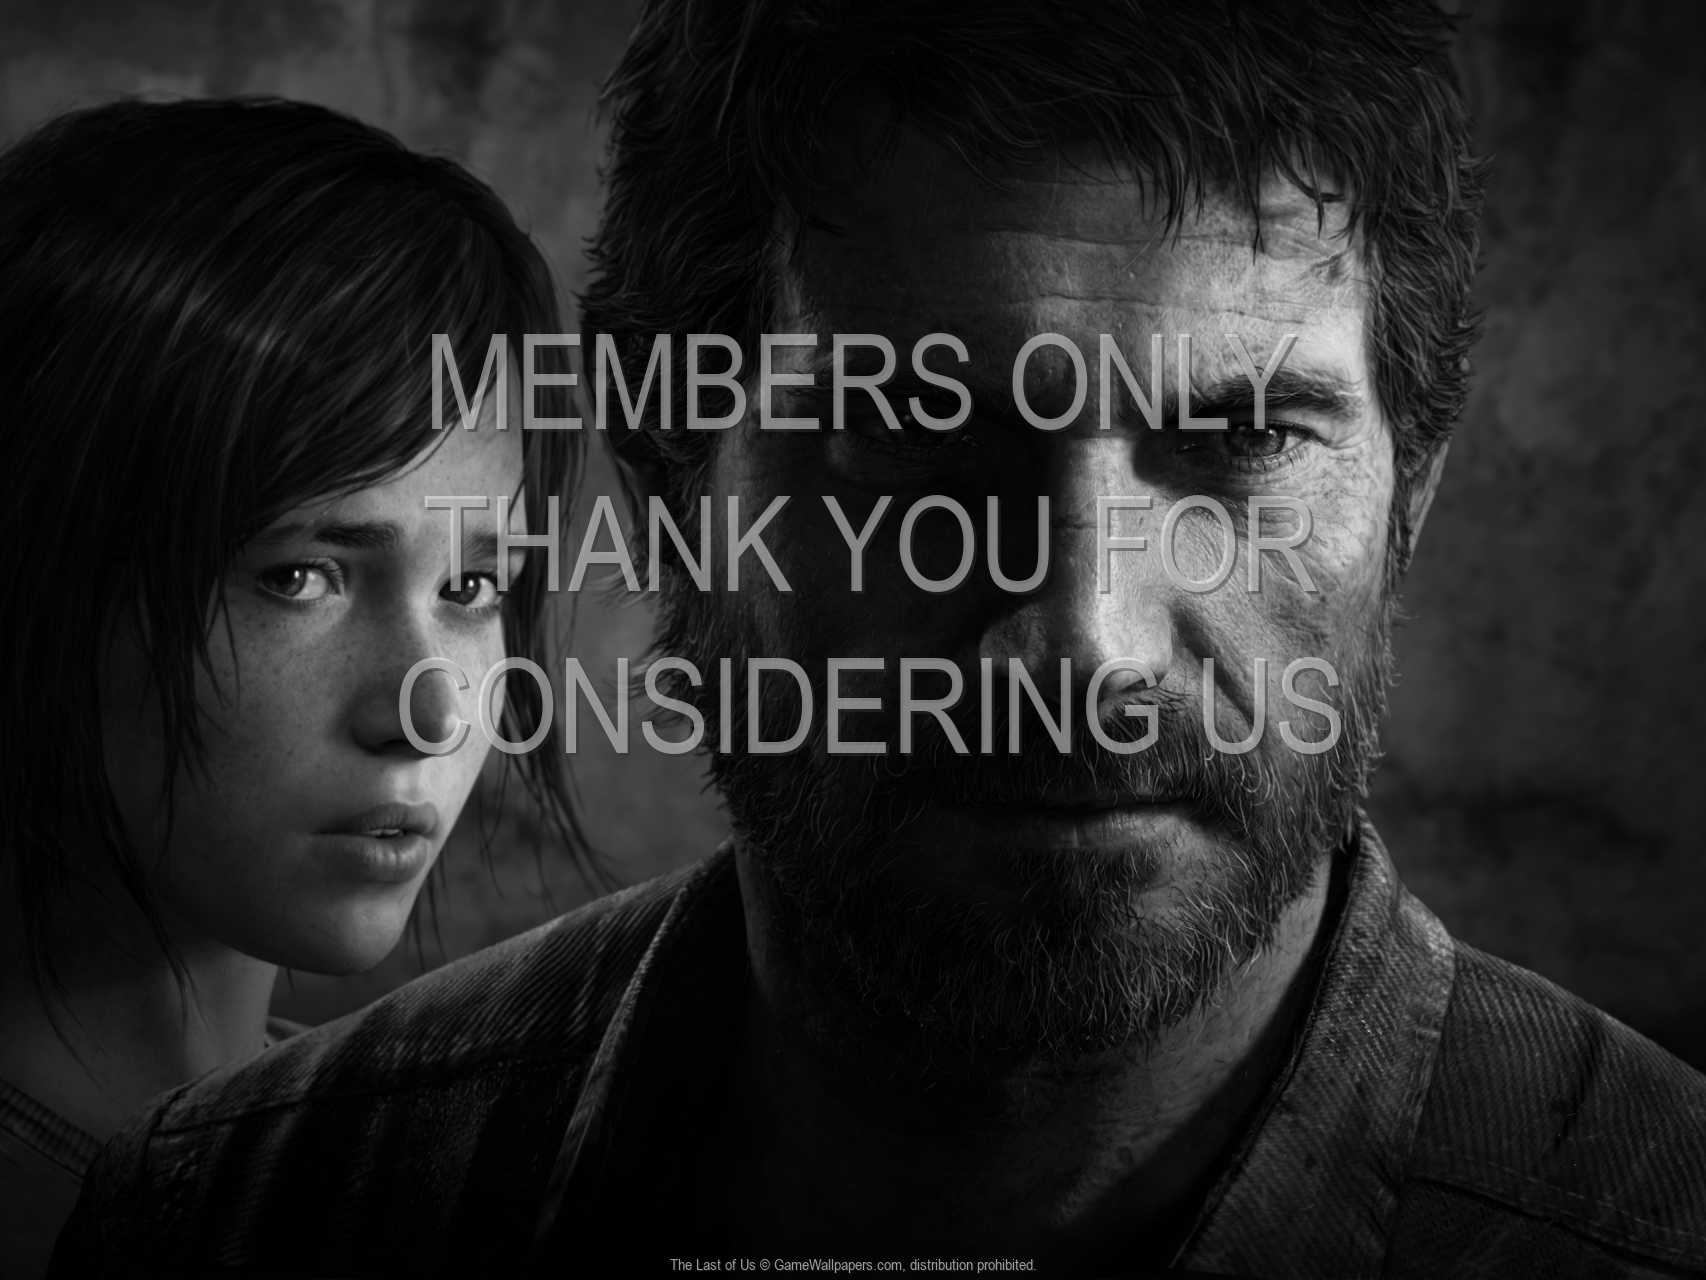 The Last of Us 720p Horizontal Mobile wallpaper or background 04